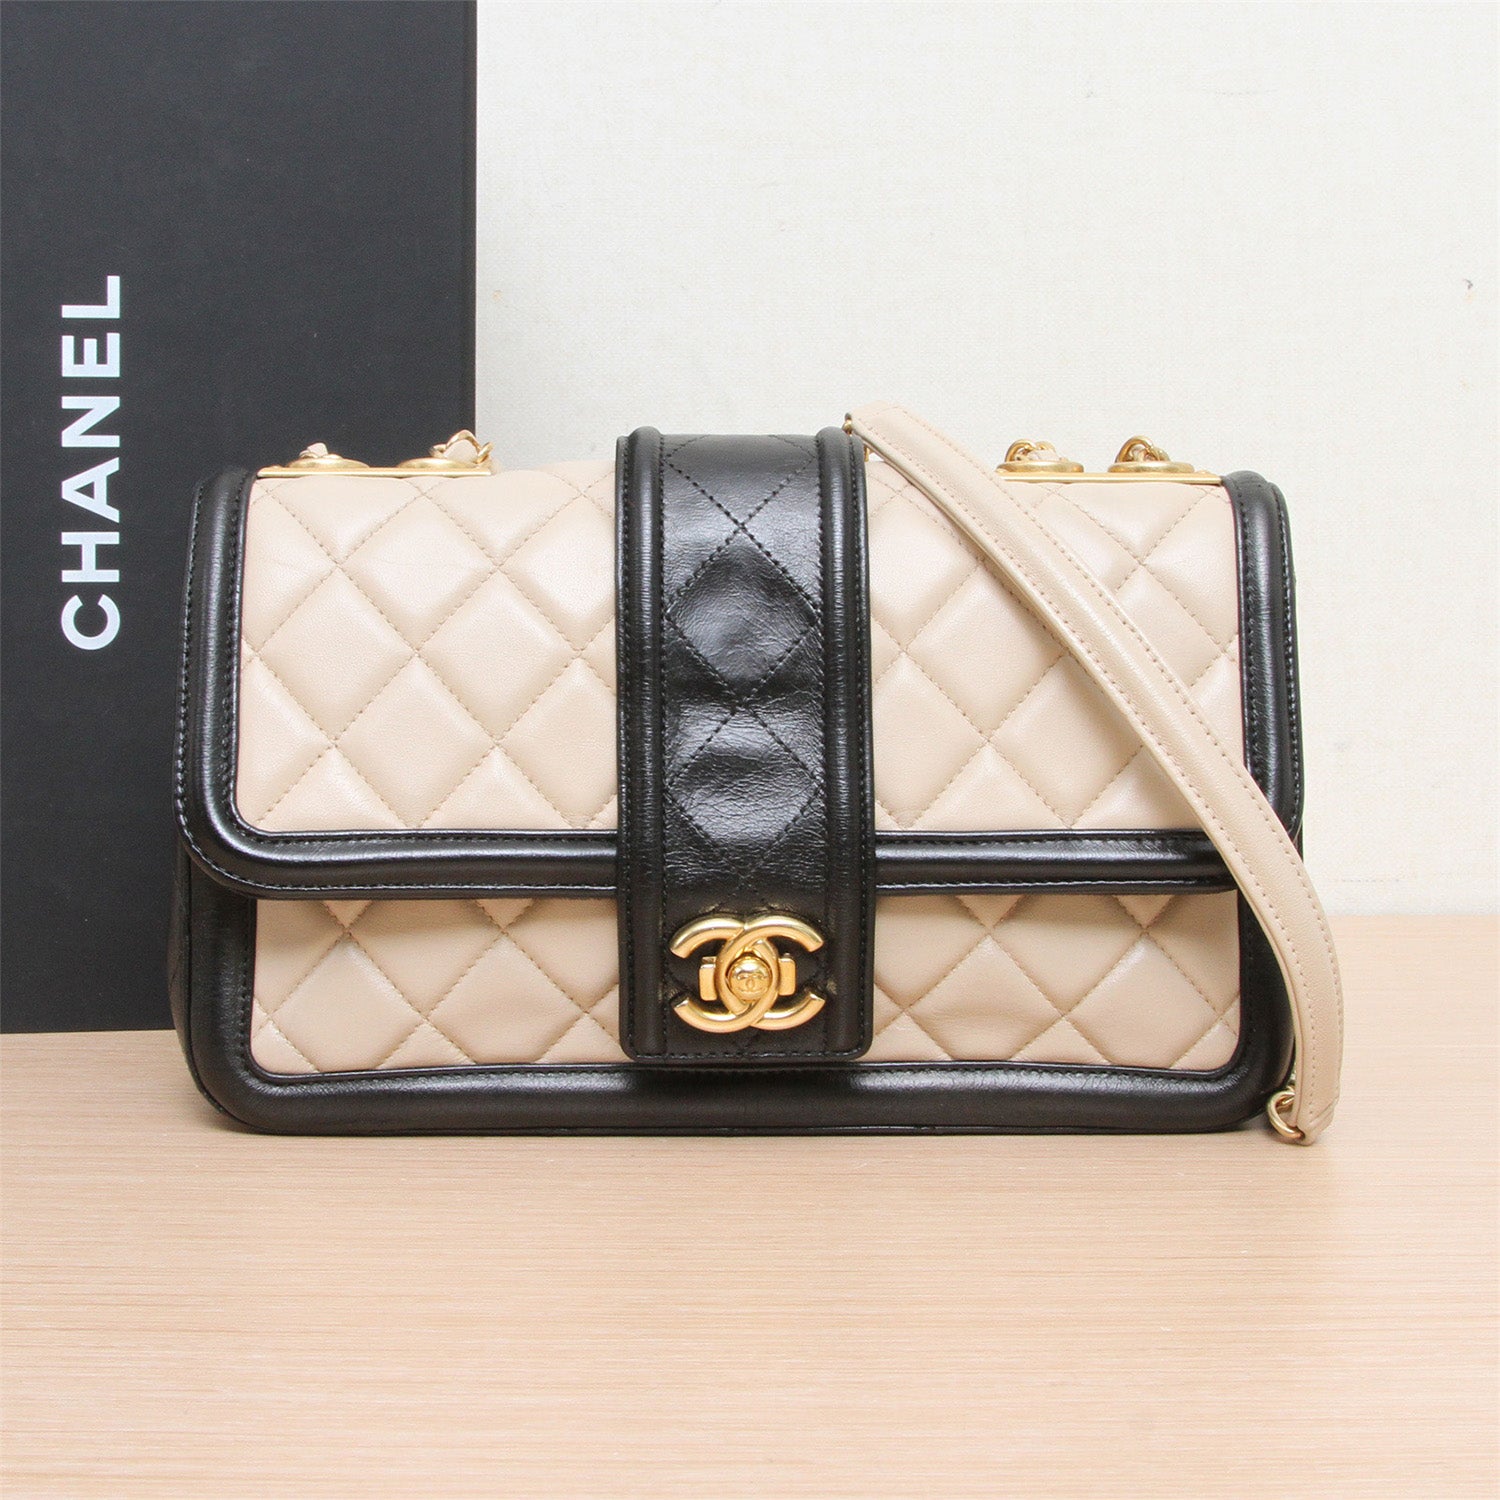 Chanel Black Quilted Leather Small Trapezio Flap Bag Chanel